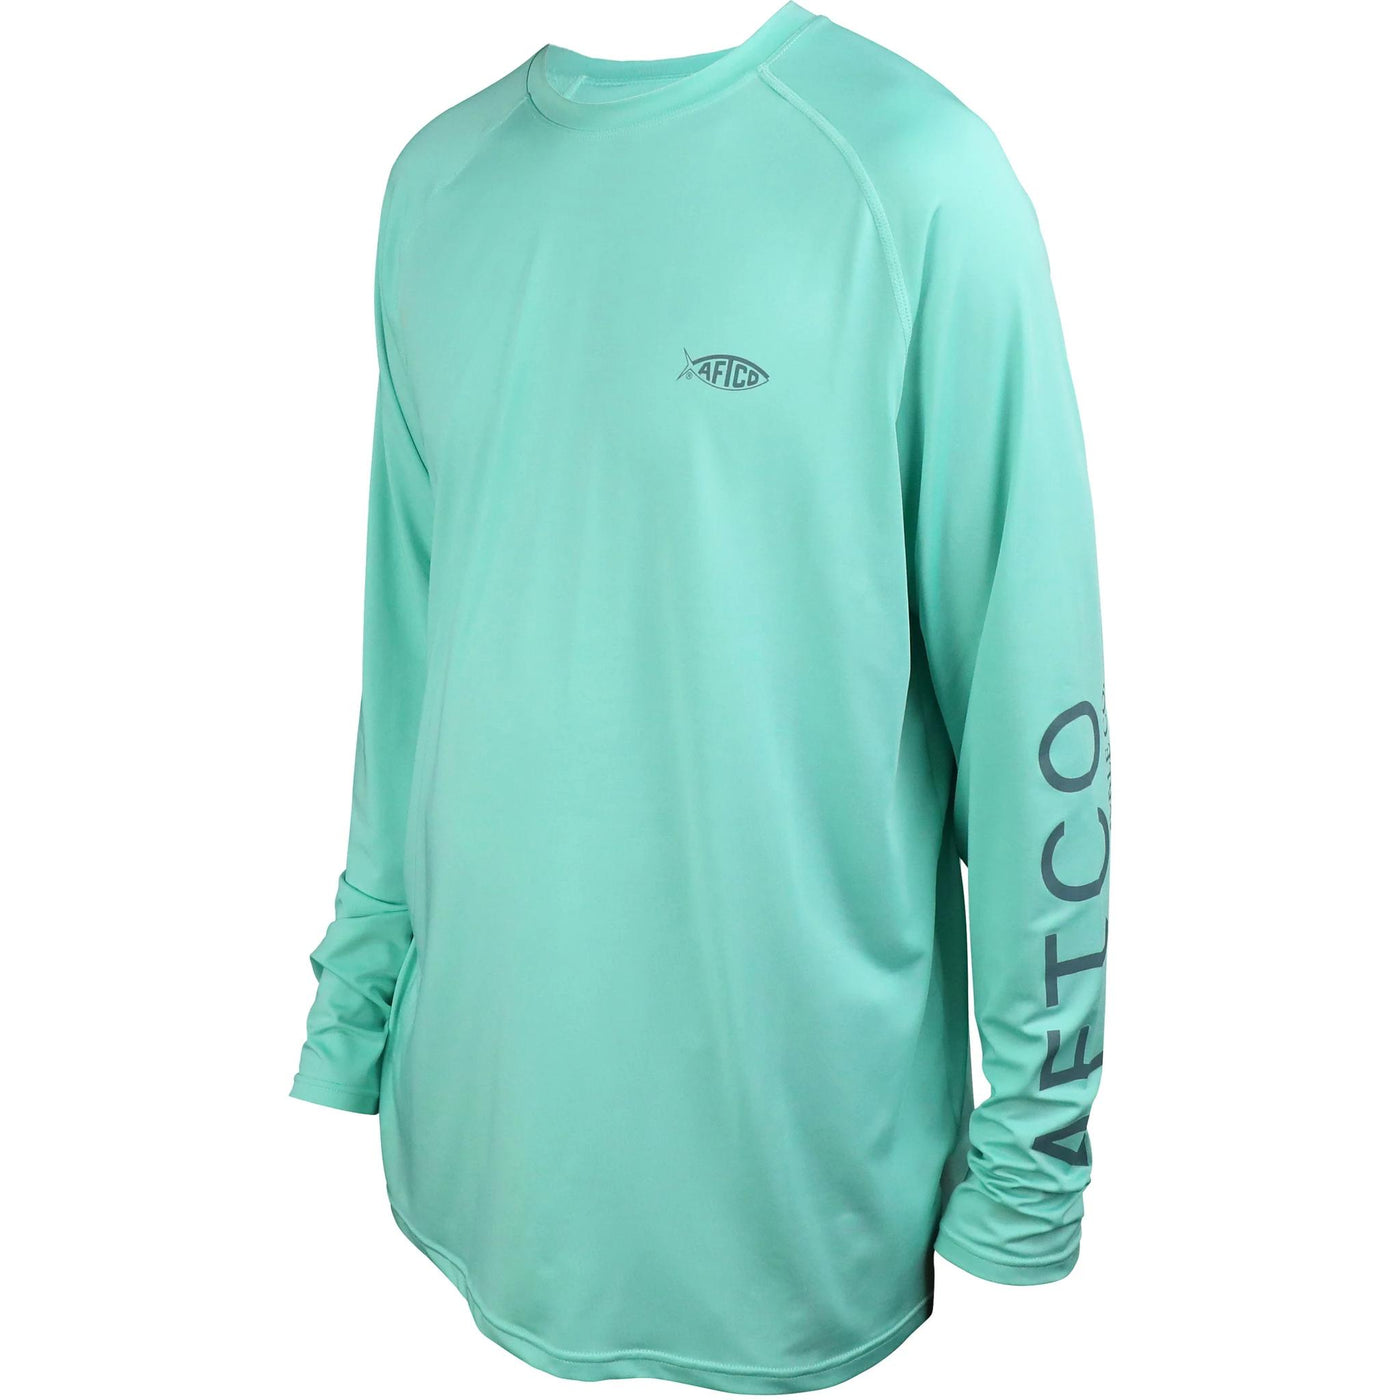 AFTCO Samurai Performance Shirt-MENS CLOTHING-Kevin's Fine Outdoor Gear & Apparel